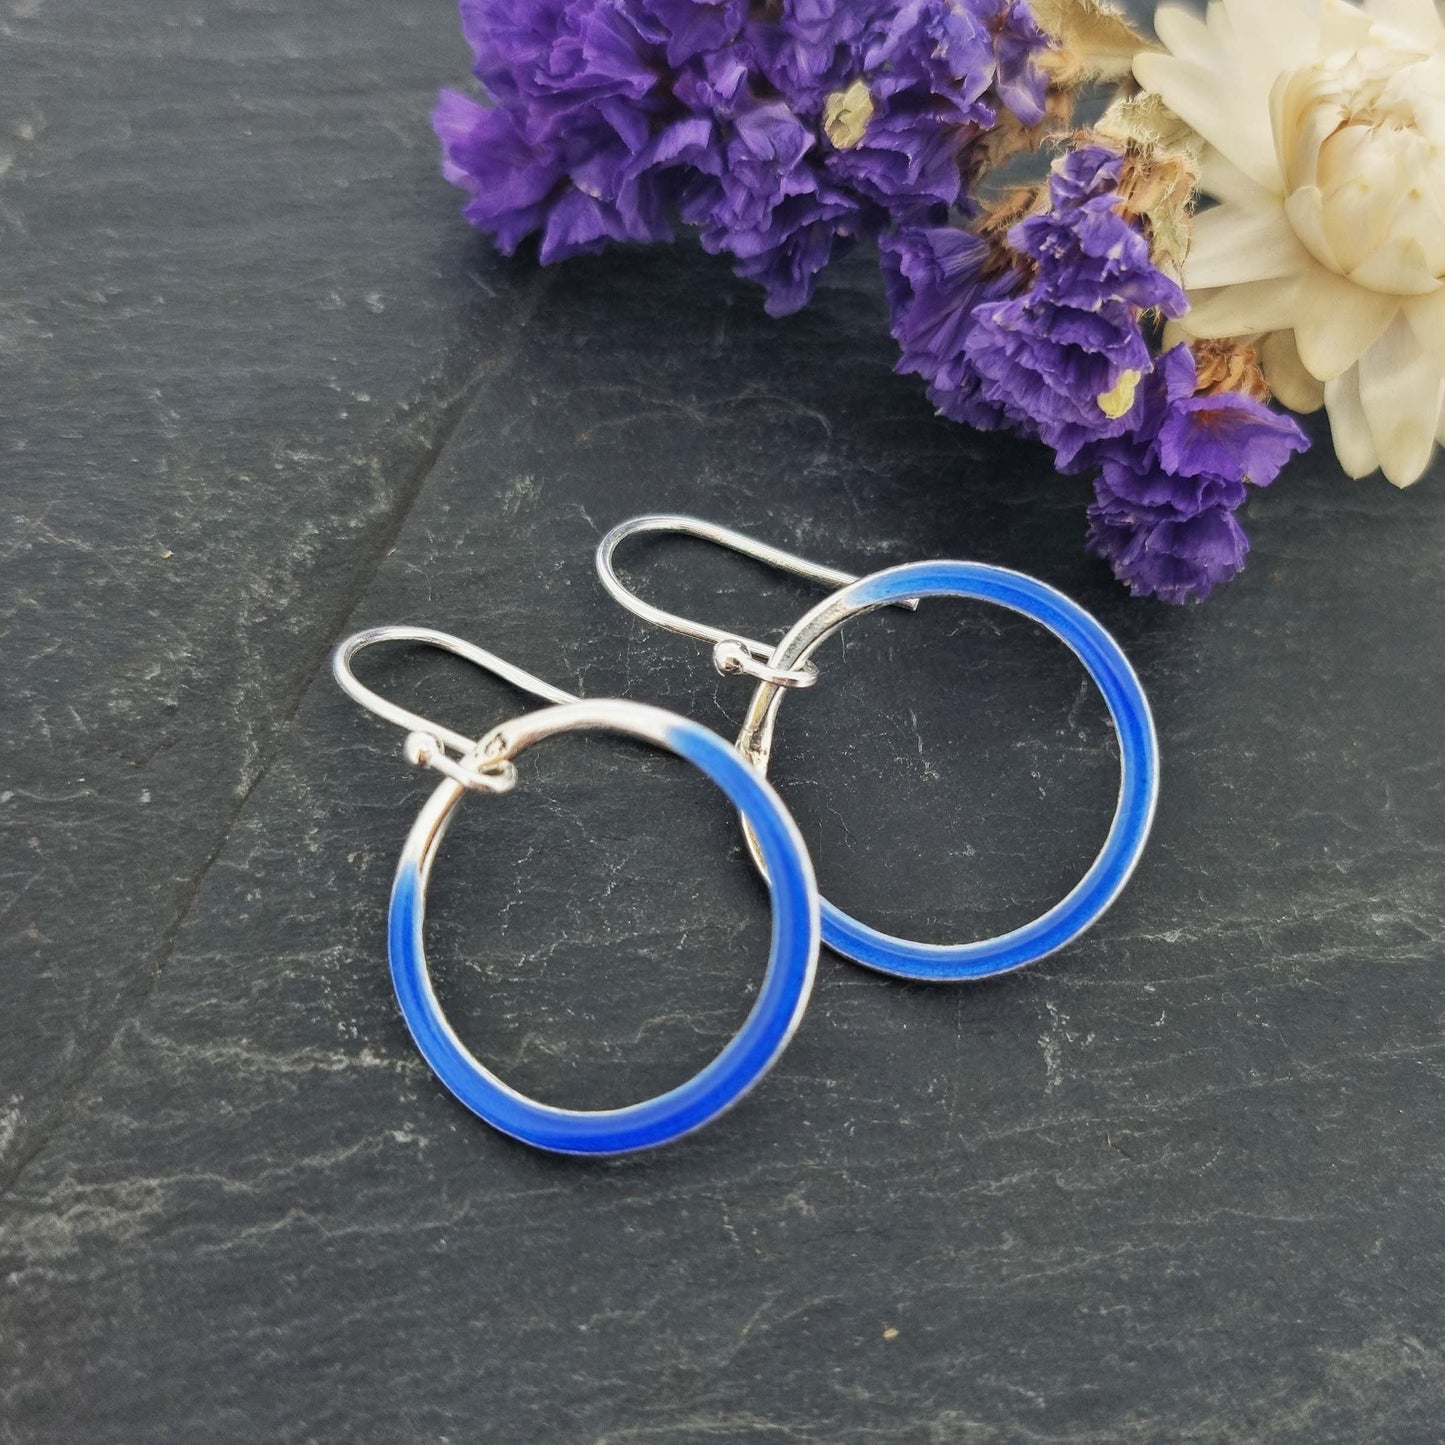 Silver open circle drop earrings with royal blue enamel. Shown with flowers.